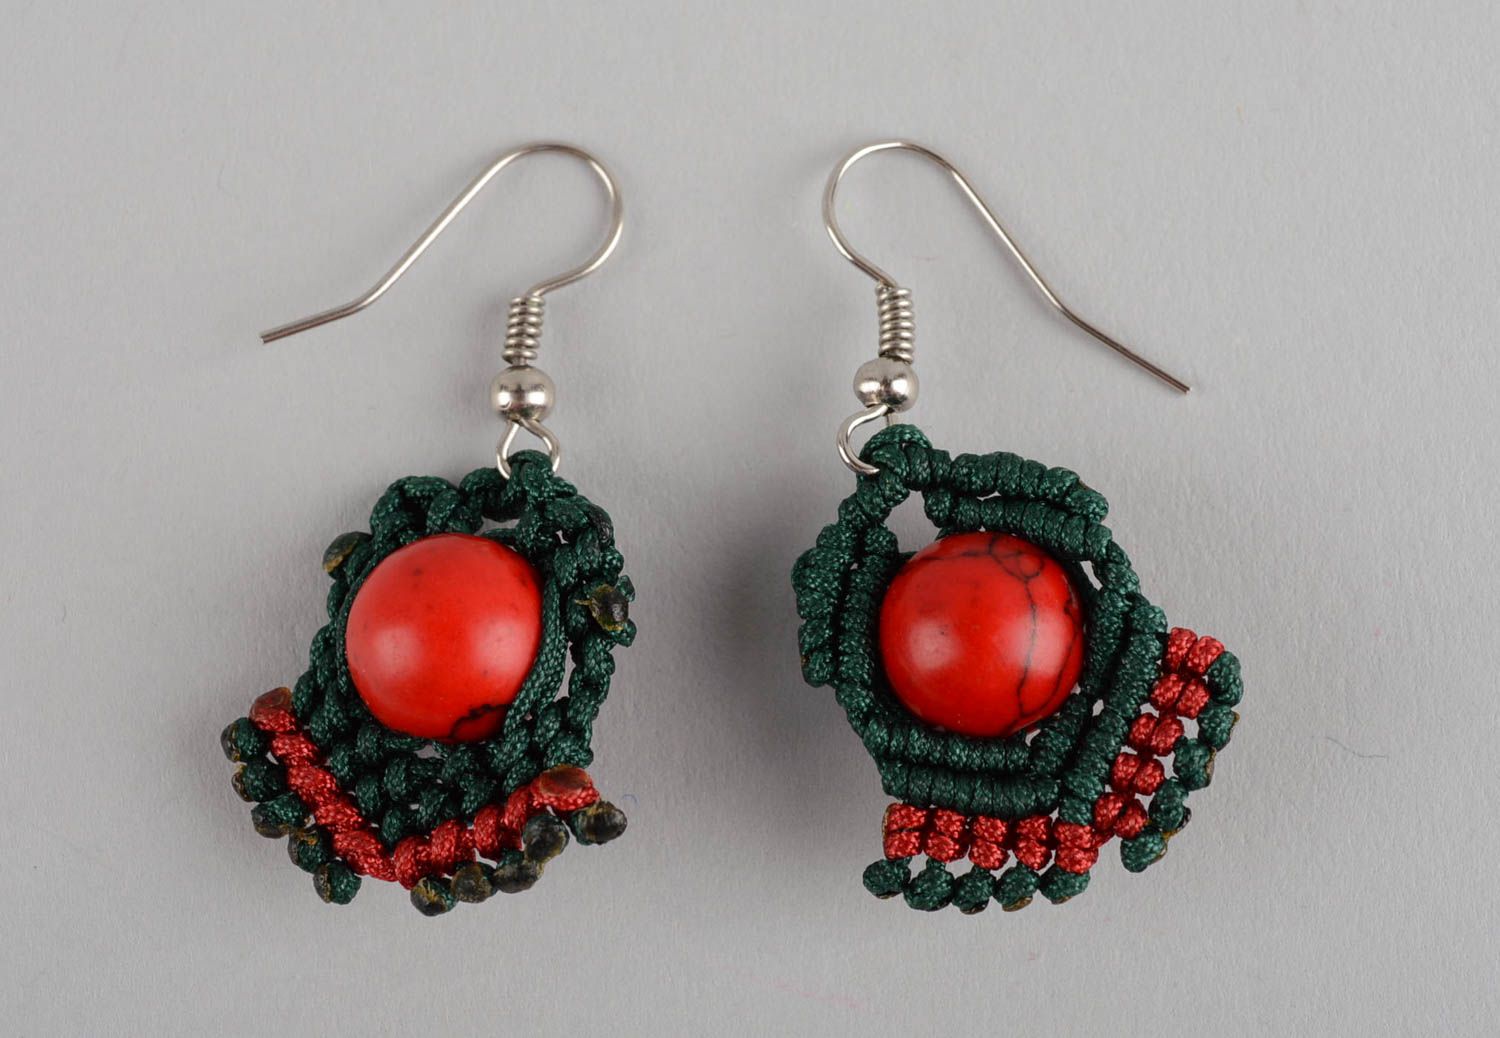 Handmade necklace stone earrings unusual accessory knitted earrings gift ideas photo 4